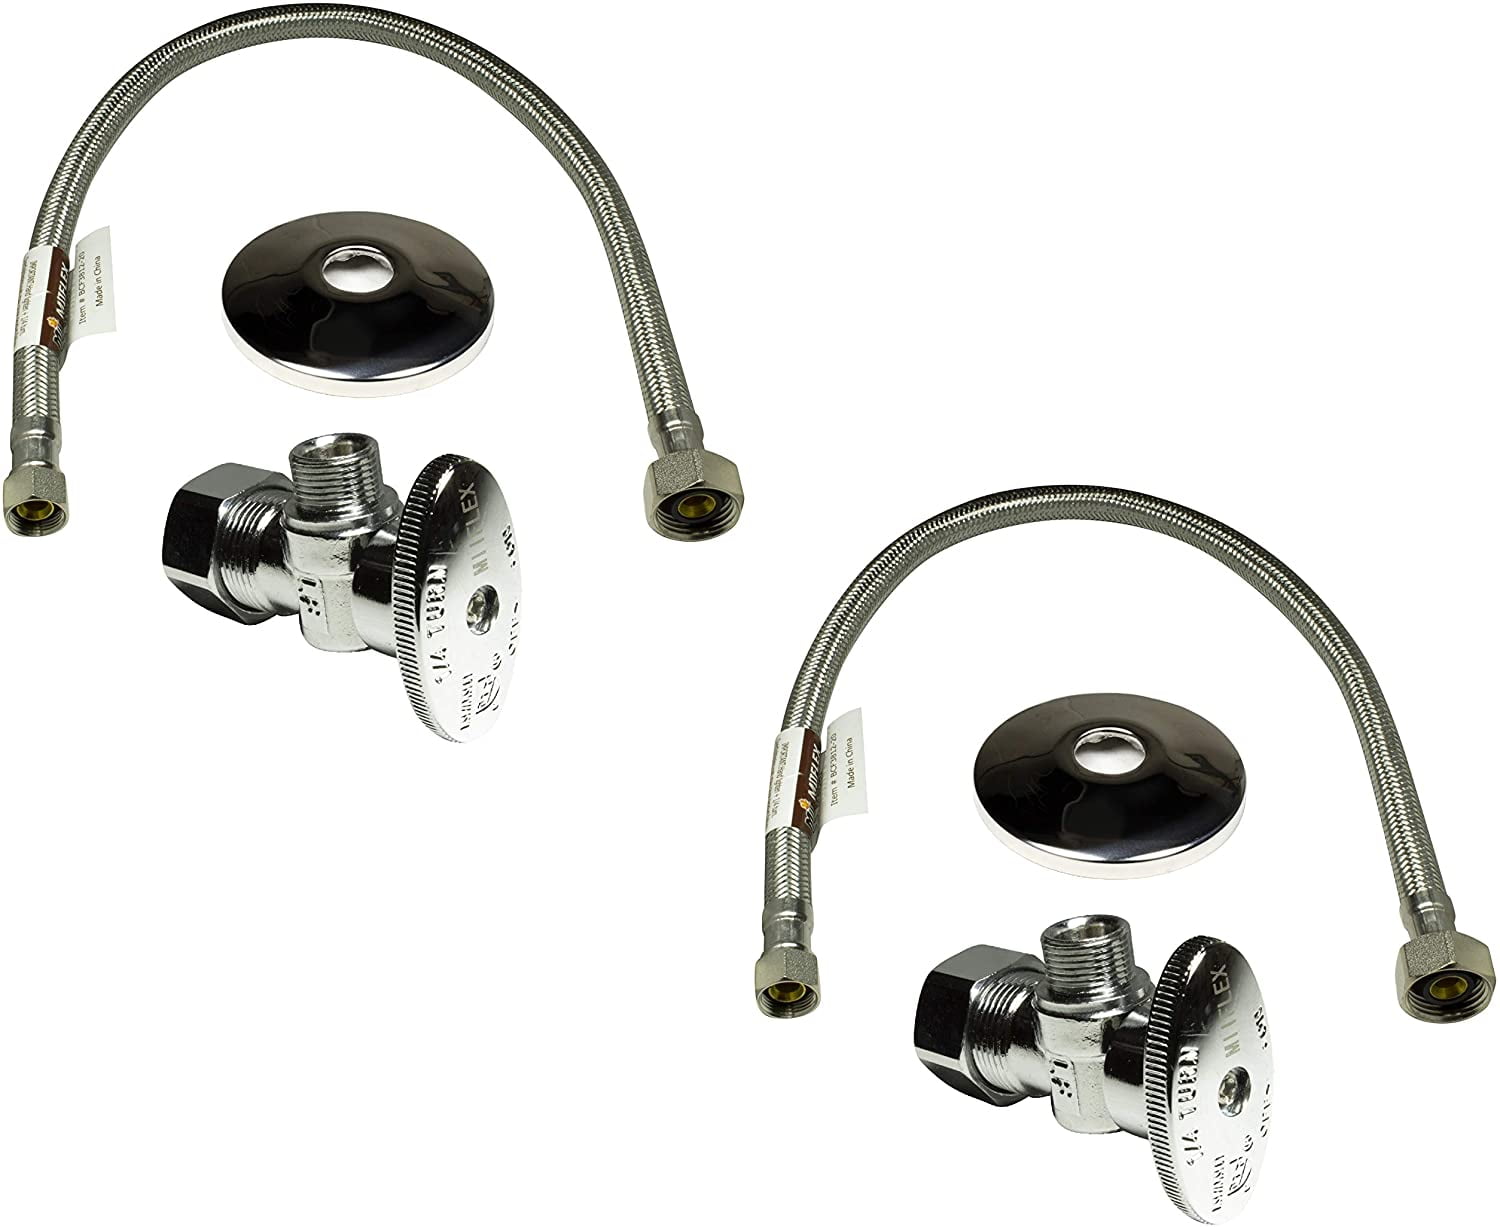 Jaclo 616-2-71-PCU 1/2 IPS x 3/8 OD Compression Valve Kit with Contemporary Round Lever Handle Polished Copper